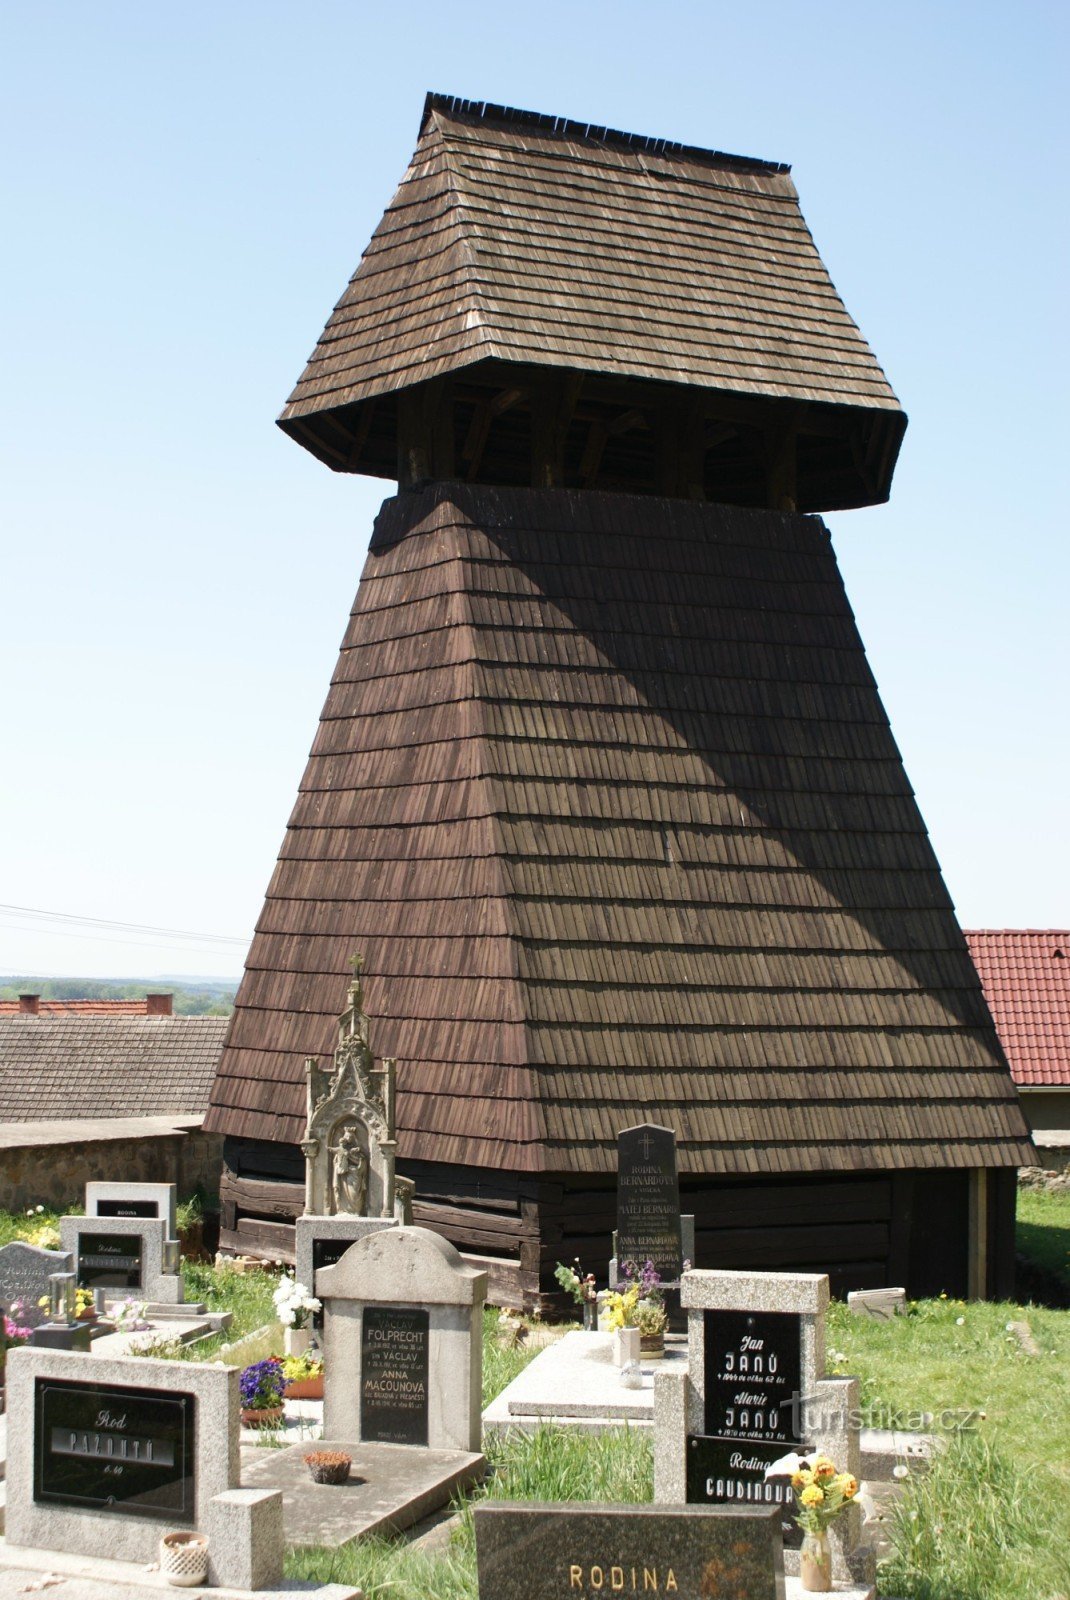 Osek (near Sobotka) – wooden bell tower and Church of the Assumption of the Virgin Mary